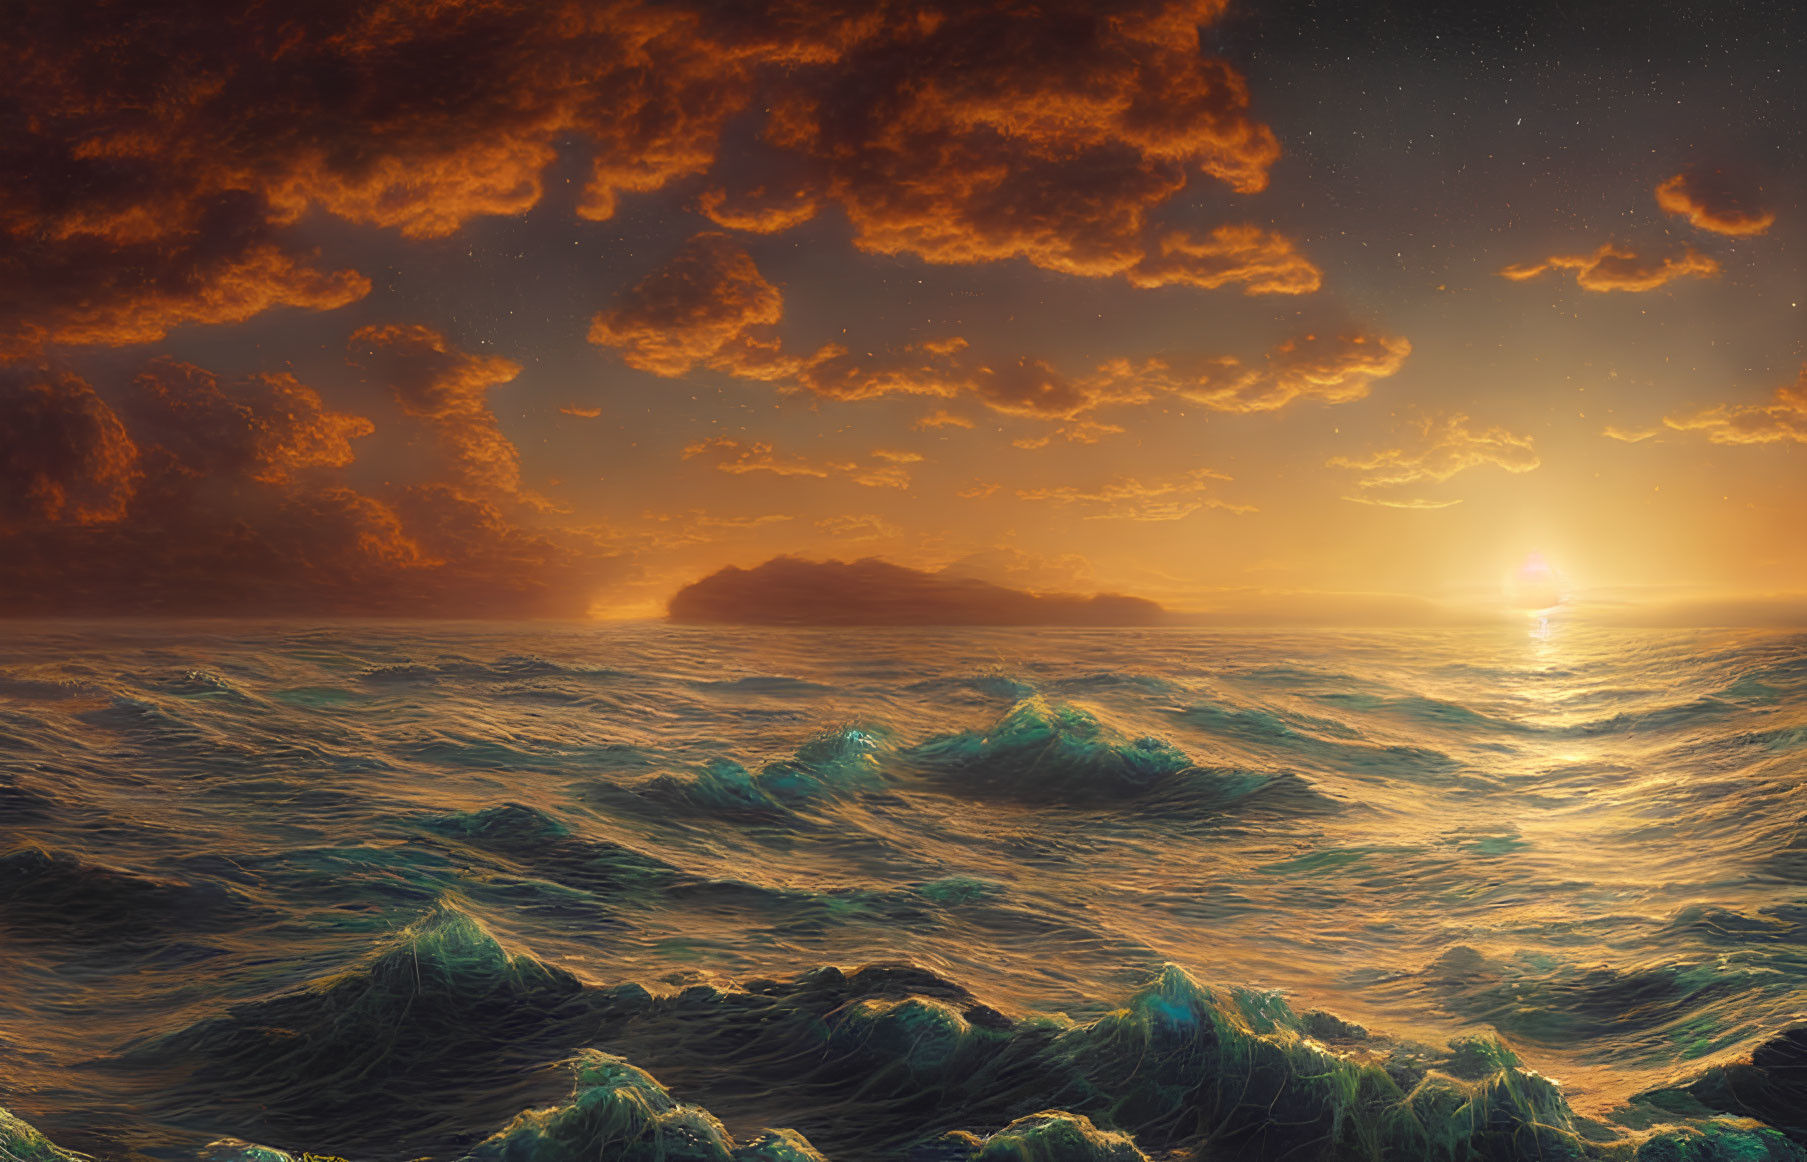 Scenic sunset view over turbulent sea with orange clouds and stars.